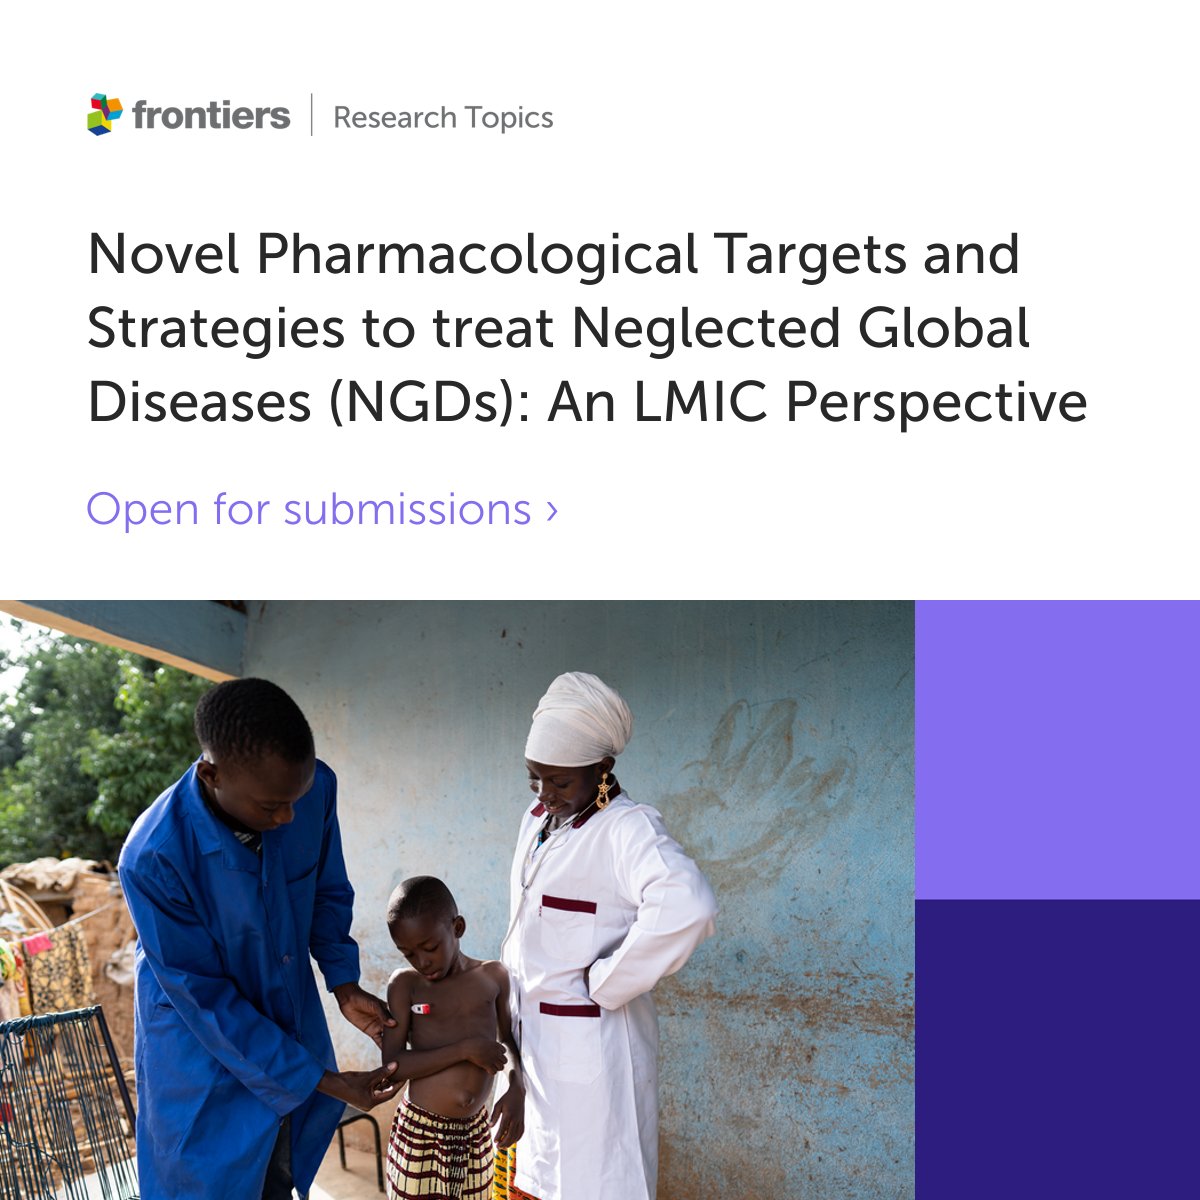 🔉0ur Research Topic 'Novel Pharmacological Targets & Strategies to combat Neglected Global Diseases #NGDs' is open for submissions. 🗓 Manuscript Deadline: 15th May 24 📆 Extended Deadline:16 June 24 #Research #OpenAccess ➡ fro.ntiers.in/mQhK